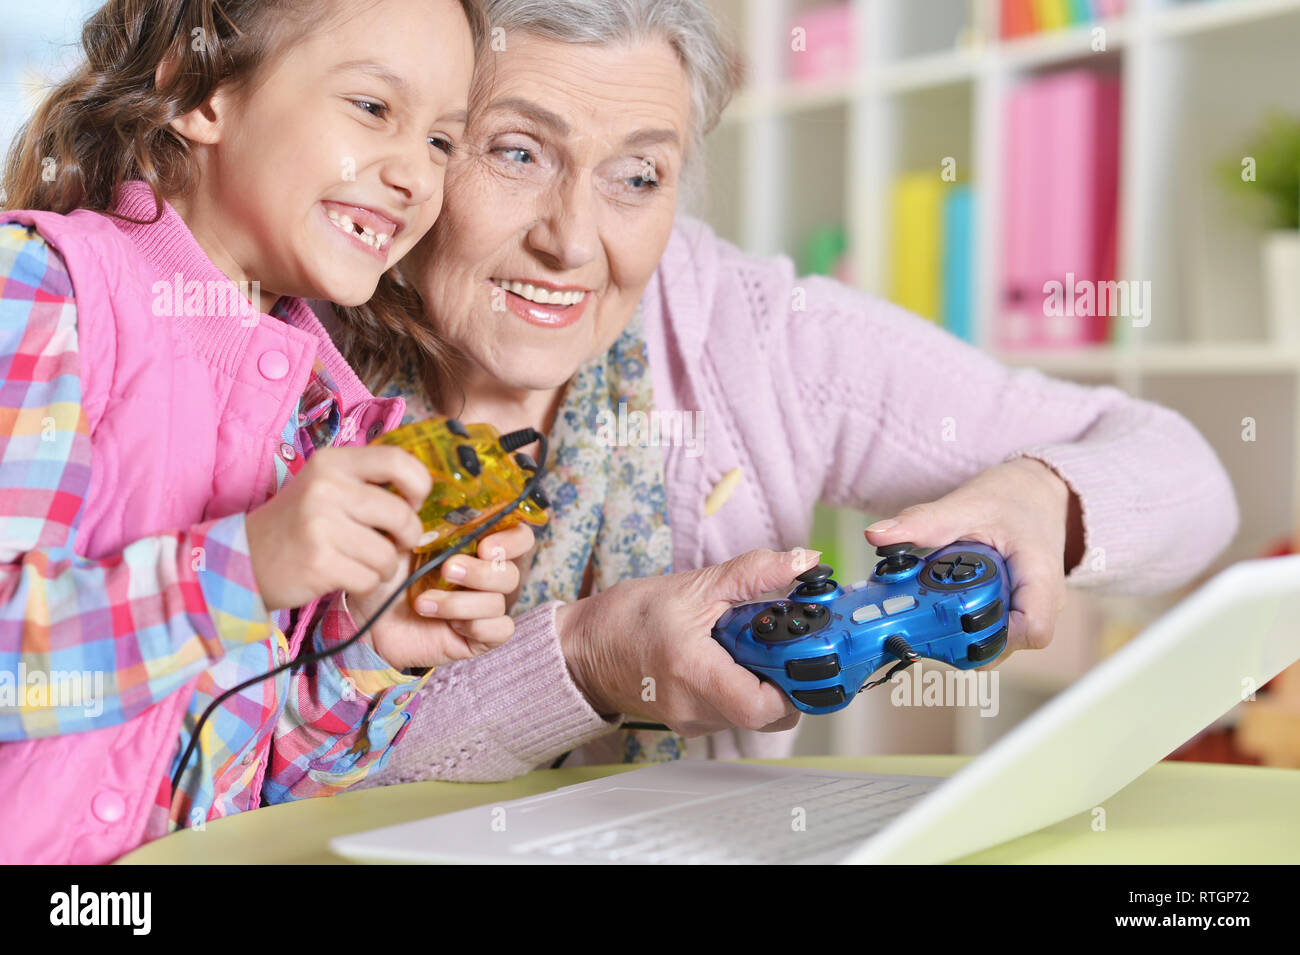 Portrait of granny with her granddaughter playing computer game on laptop Stock Photo